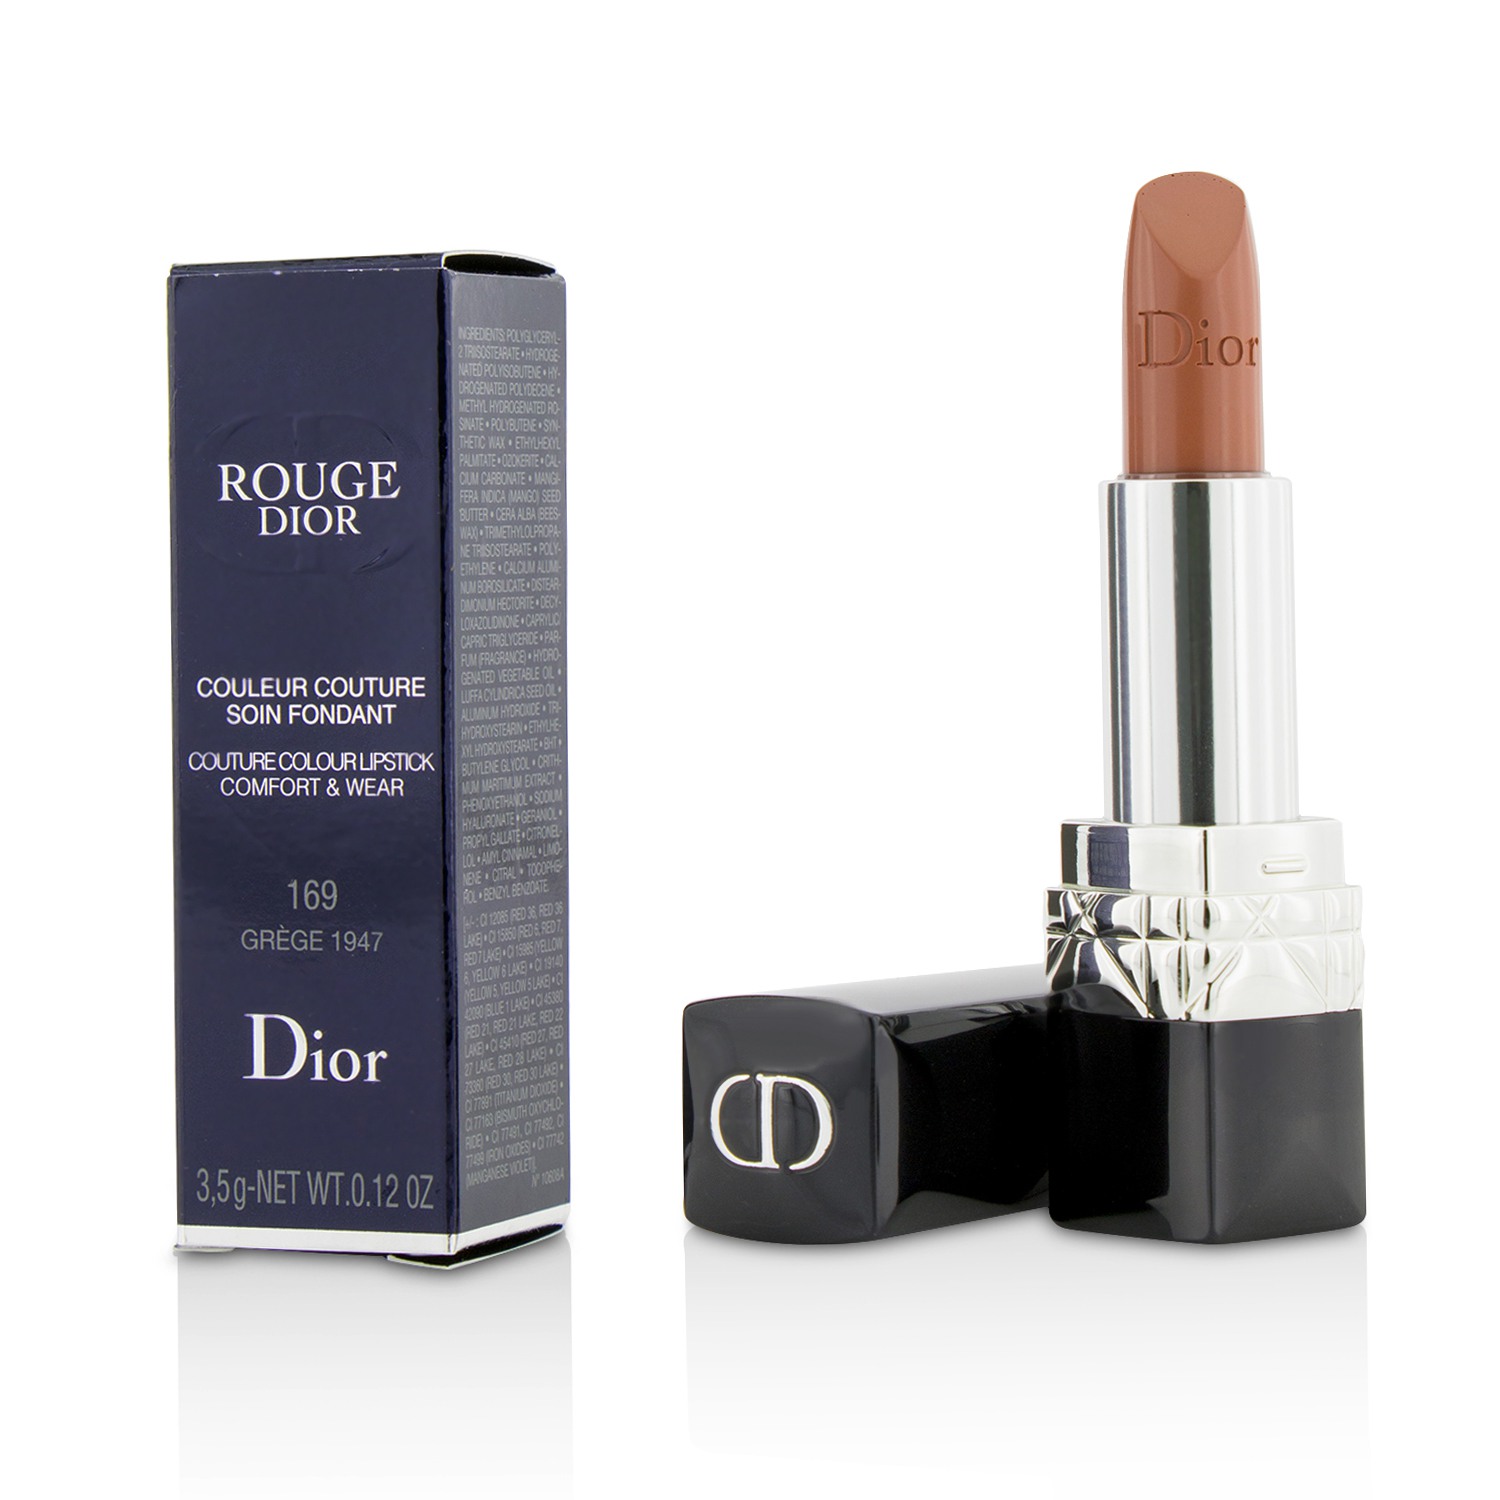 Rouge Dior Couture Colour Comfort & Wear Lipstick - # 169 Grege 1947 Christian Dior Image